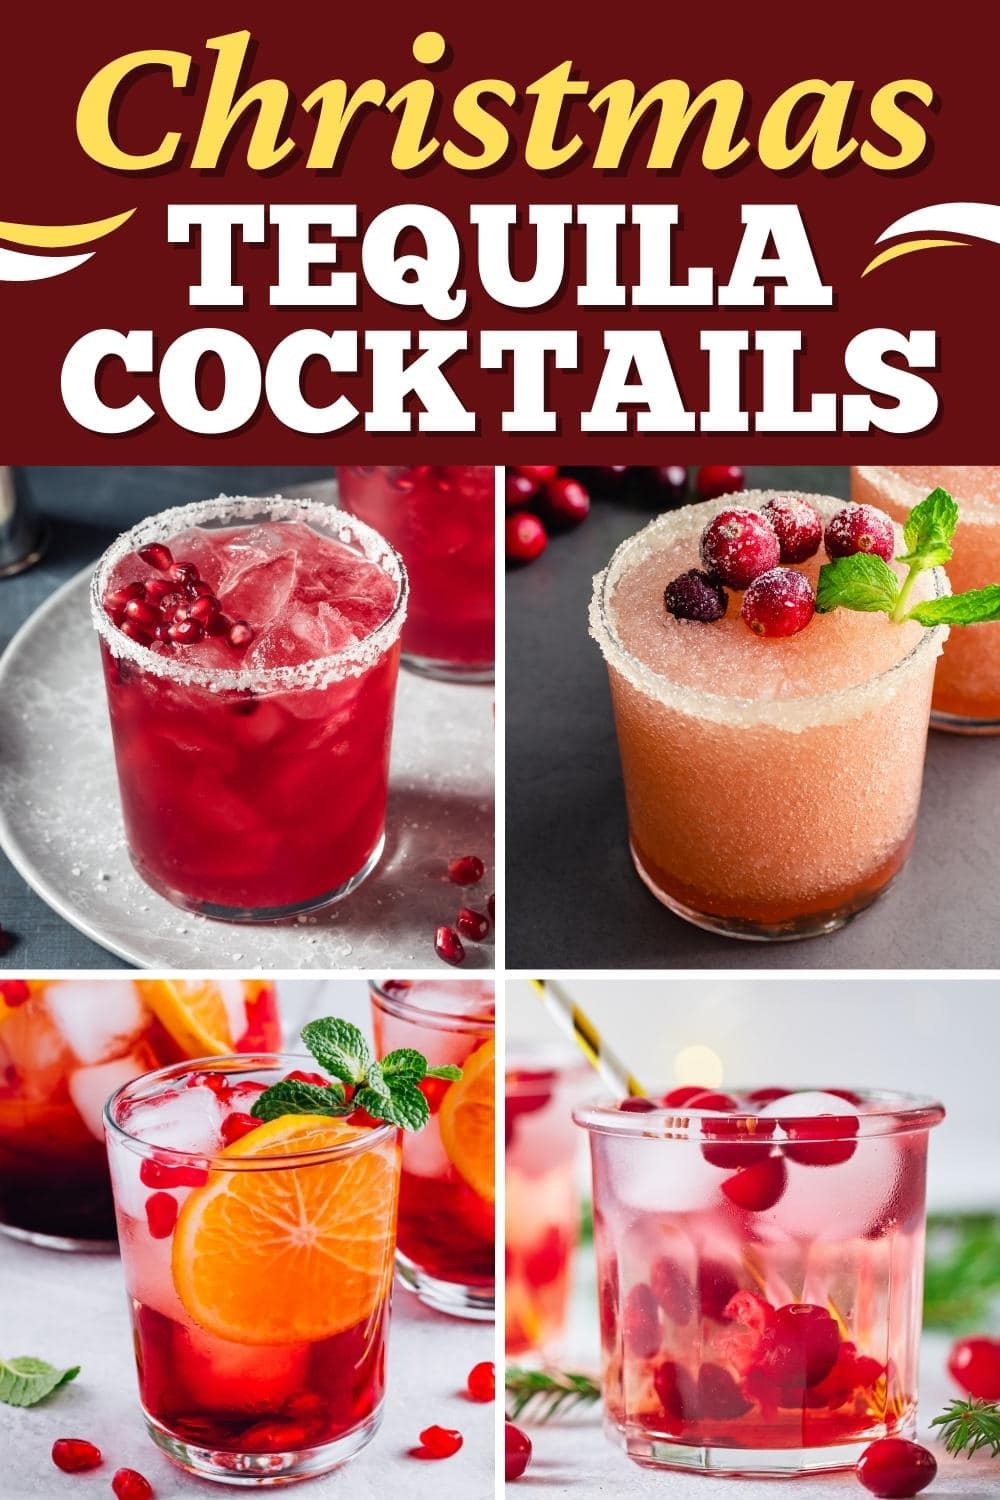 10 Christmas Tequila Cocktails (+ Easy Drink Recipes) – Houze Cook